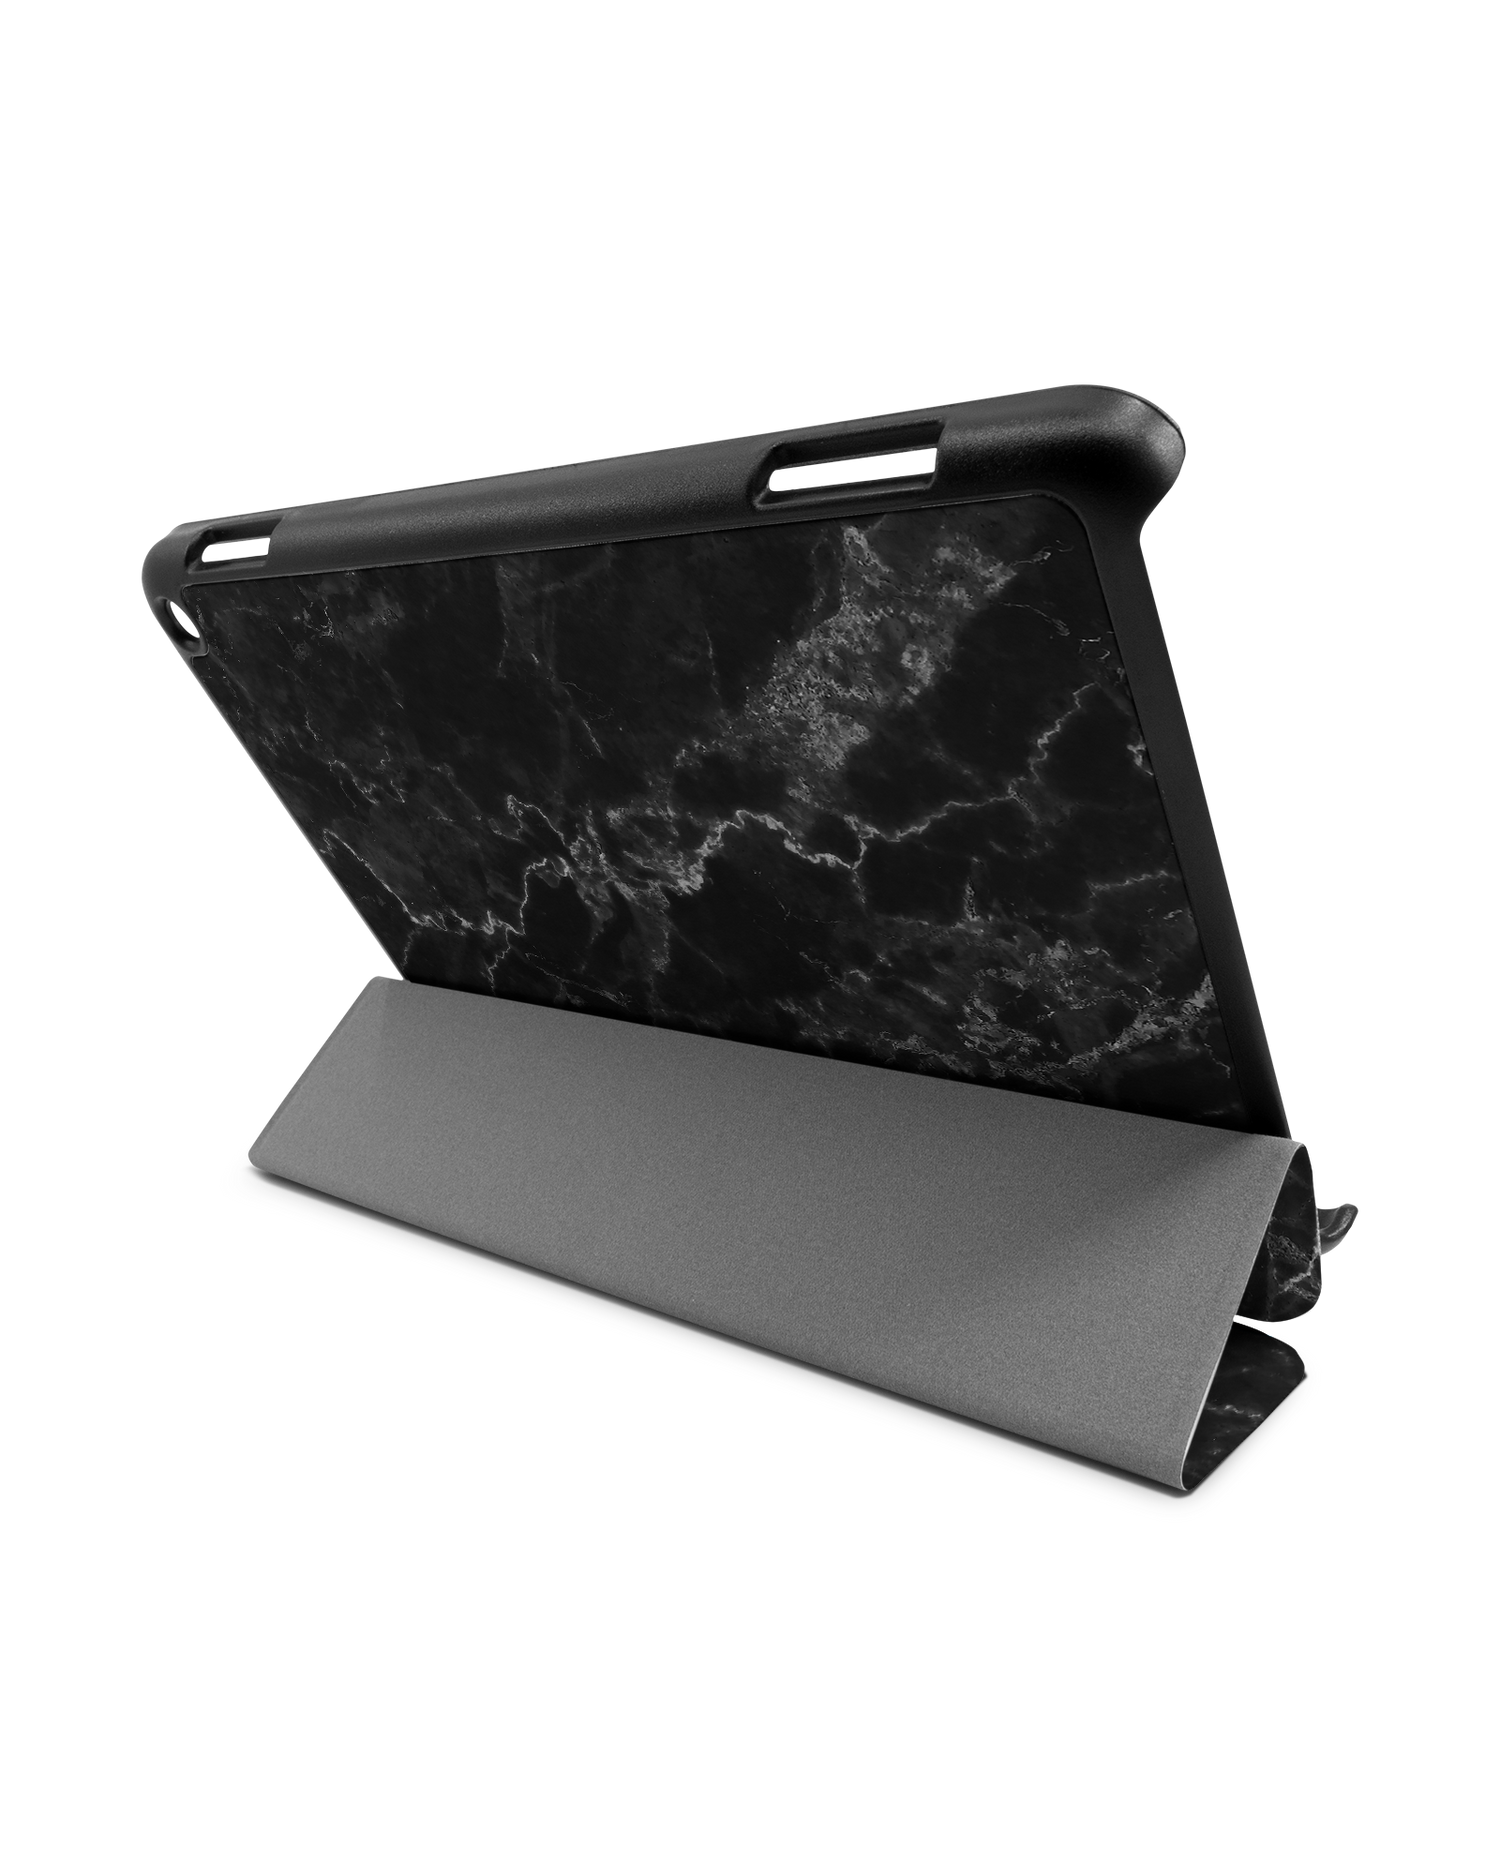 Midnight Marble Tablet Smart Case for Amazon Fire HD 8 (2022), Amazon Fire HD 8 Plus (2022), Amazon Fire HD 8 (2020), Amazon Fire HD 8 Plus (2020): Used as Stand